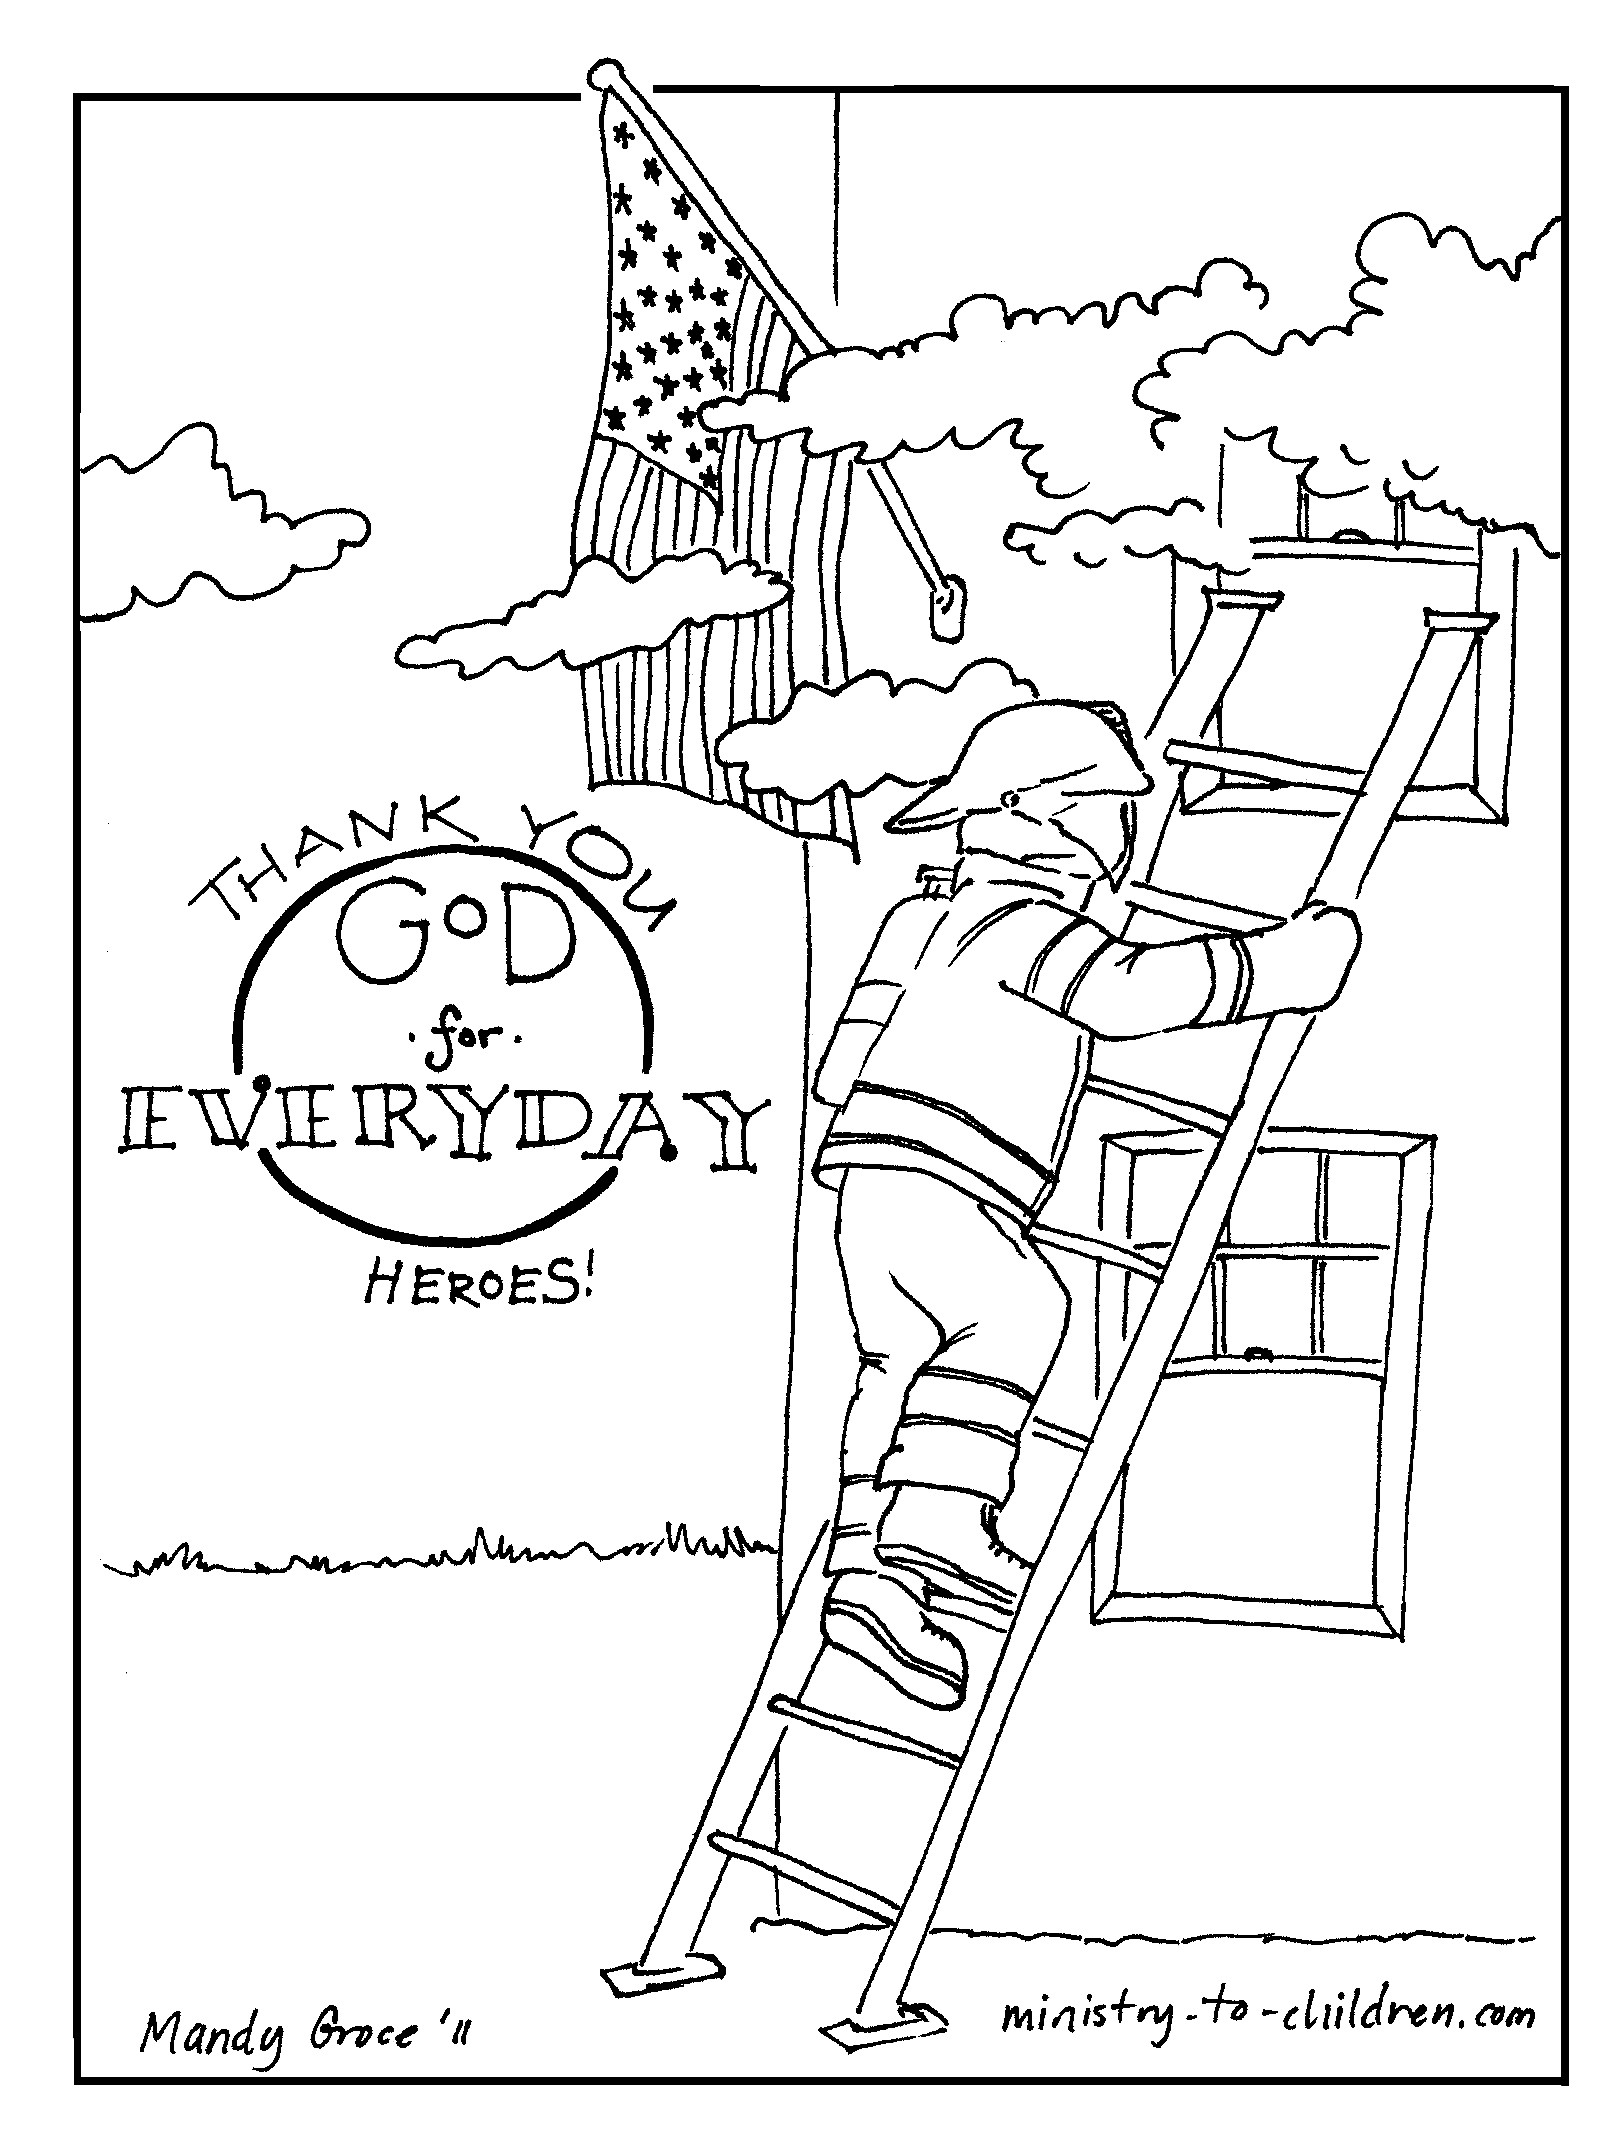 Summer Safety Coloring Pages Safety Drawing At Getdrawings Free For Personal Use Safety